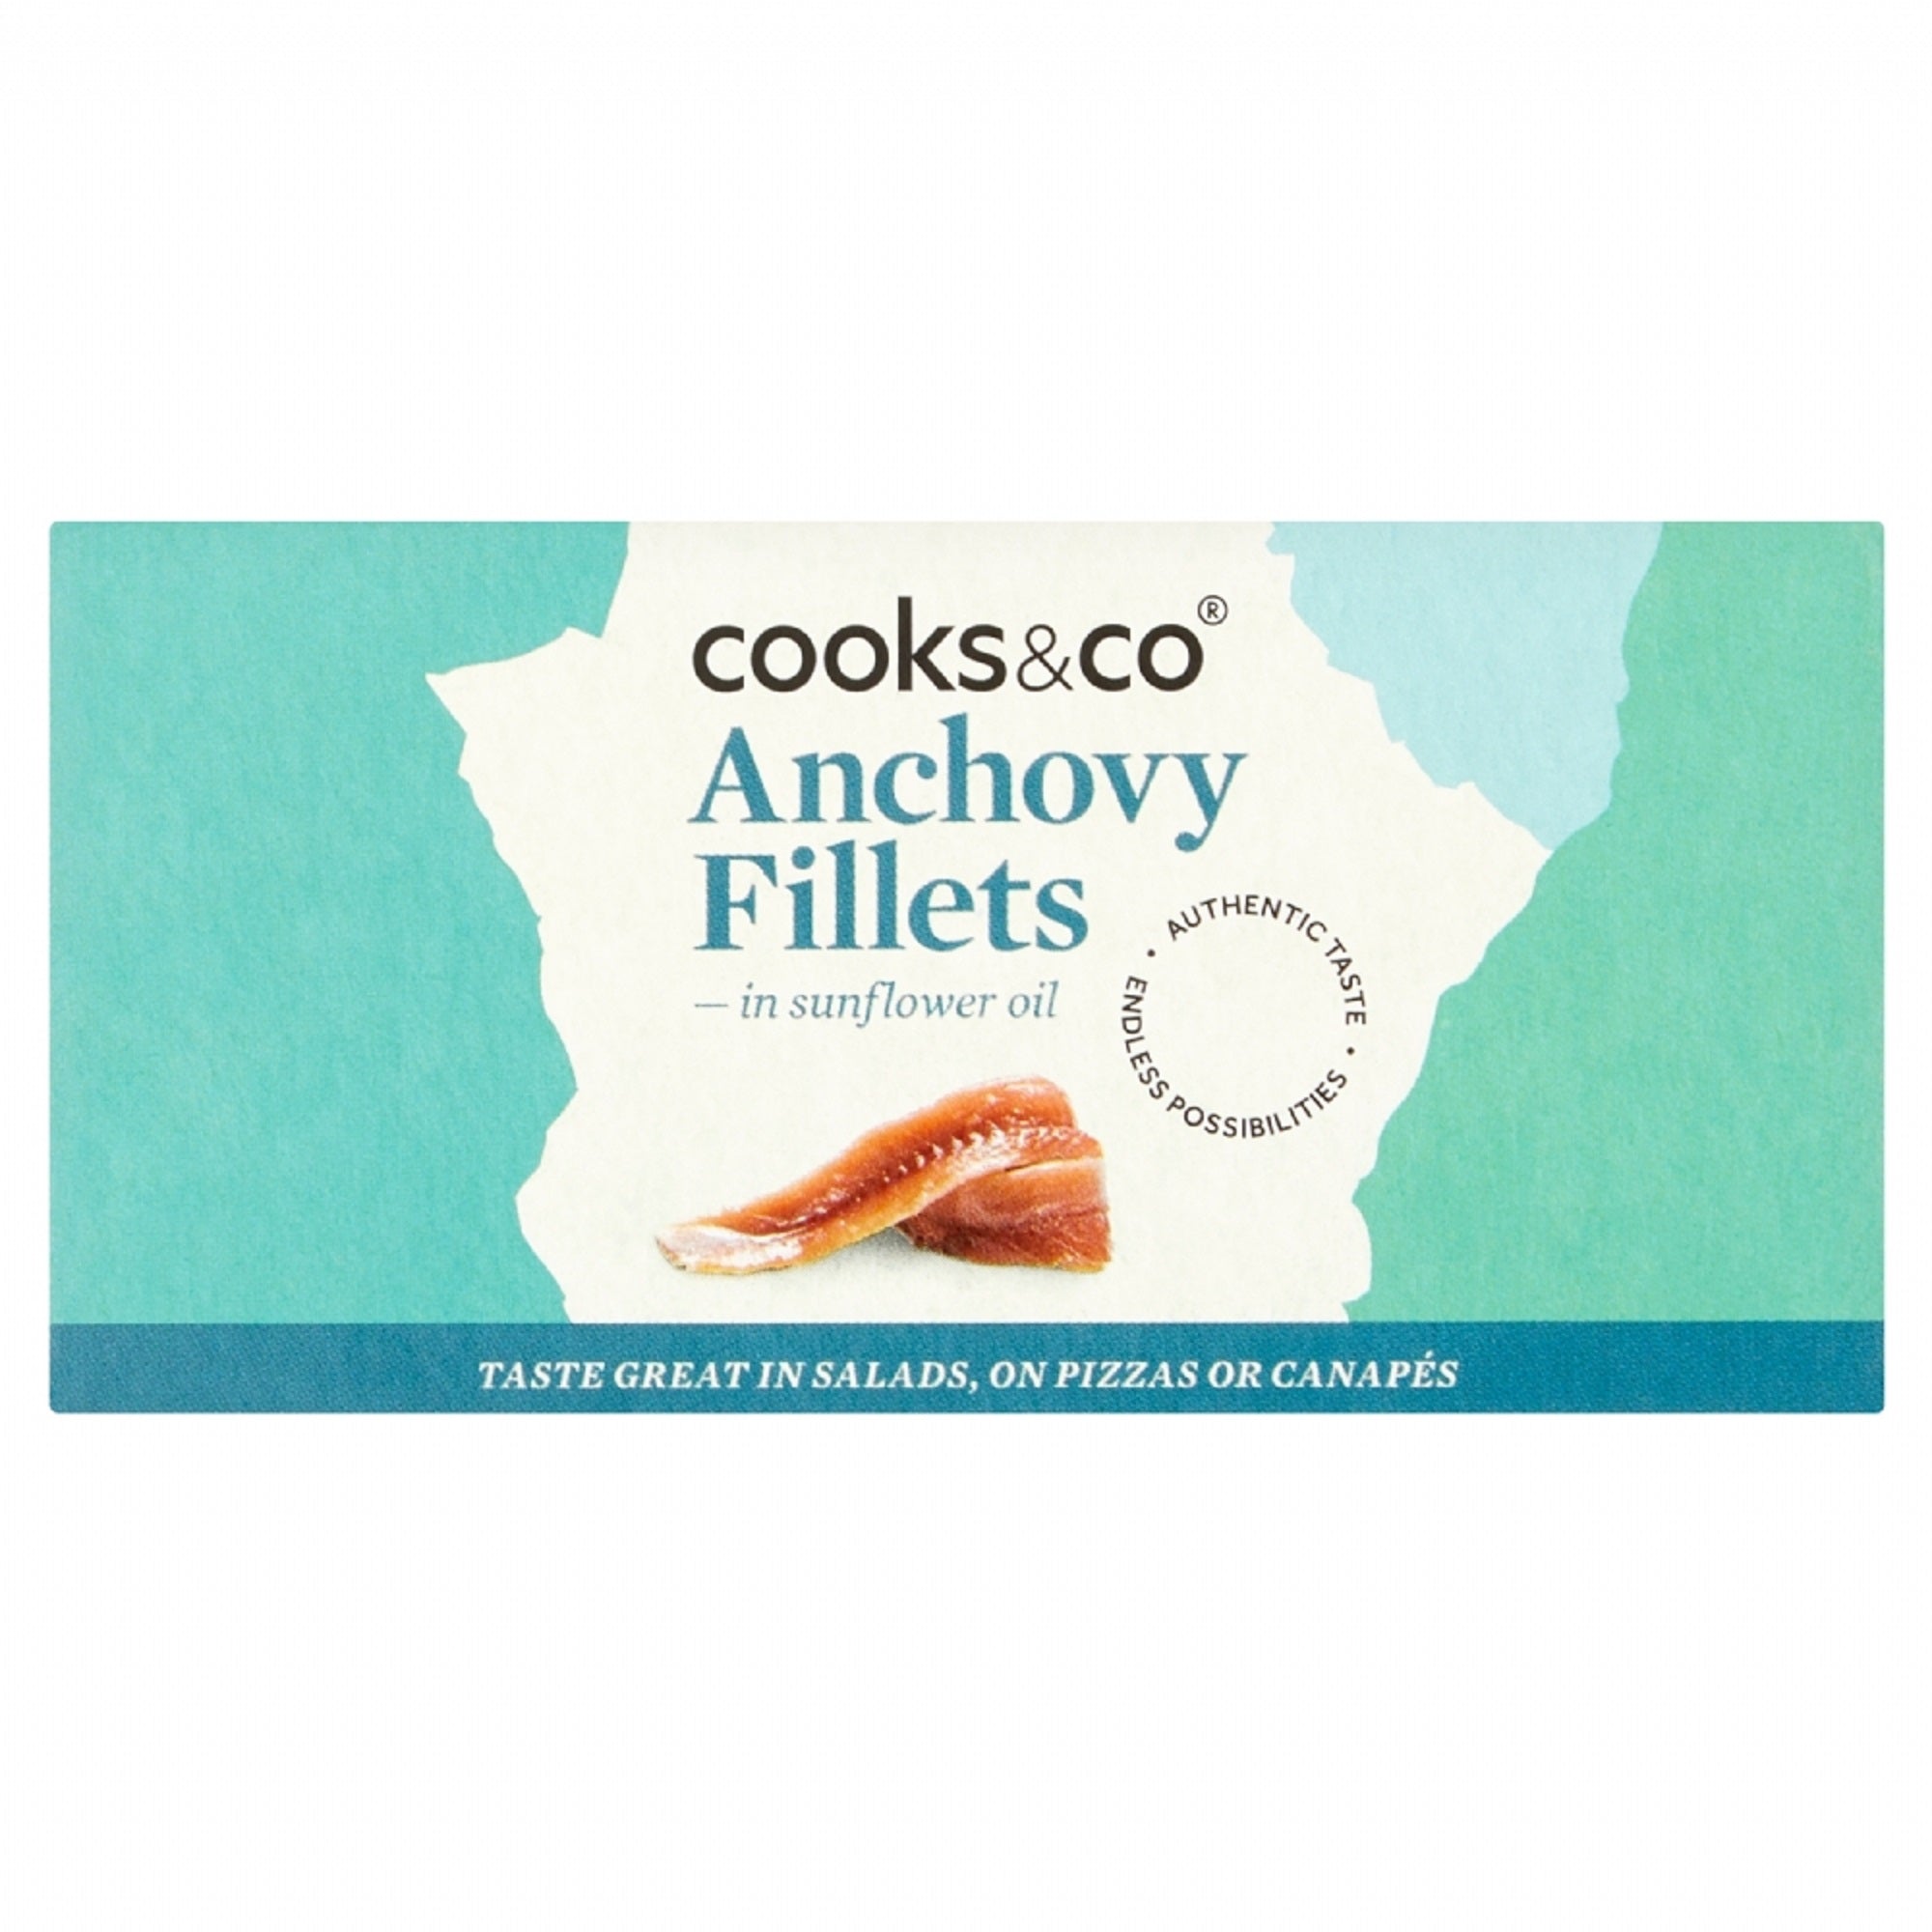 COOKS & CO. ANCHOVY FILLETS IN OIL (50g)